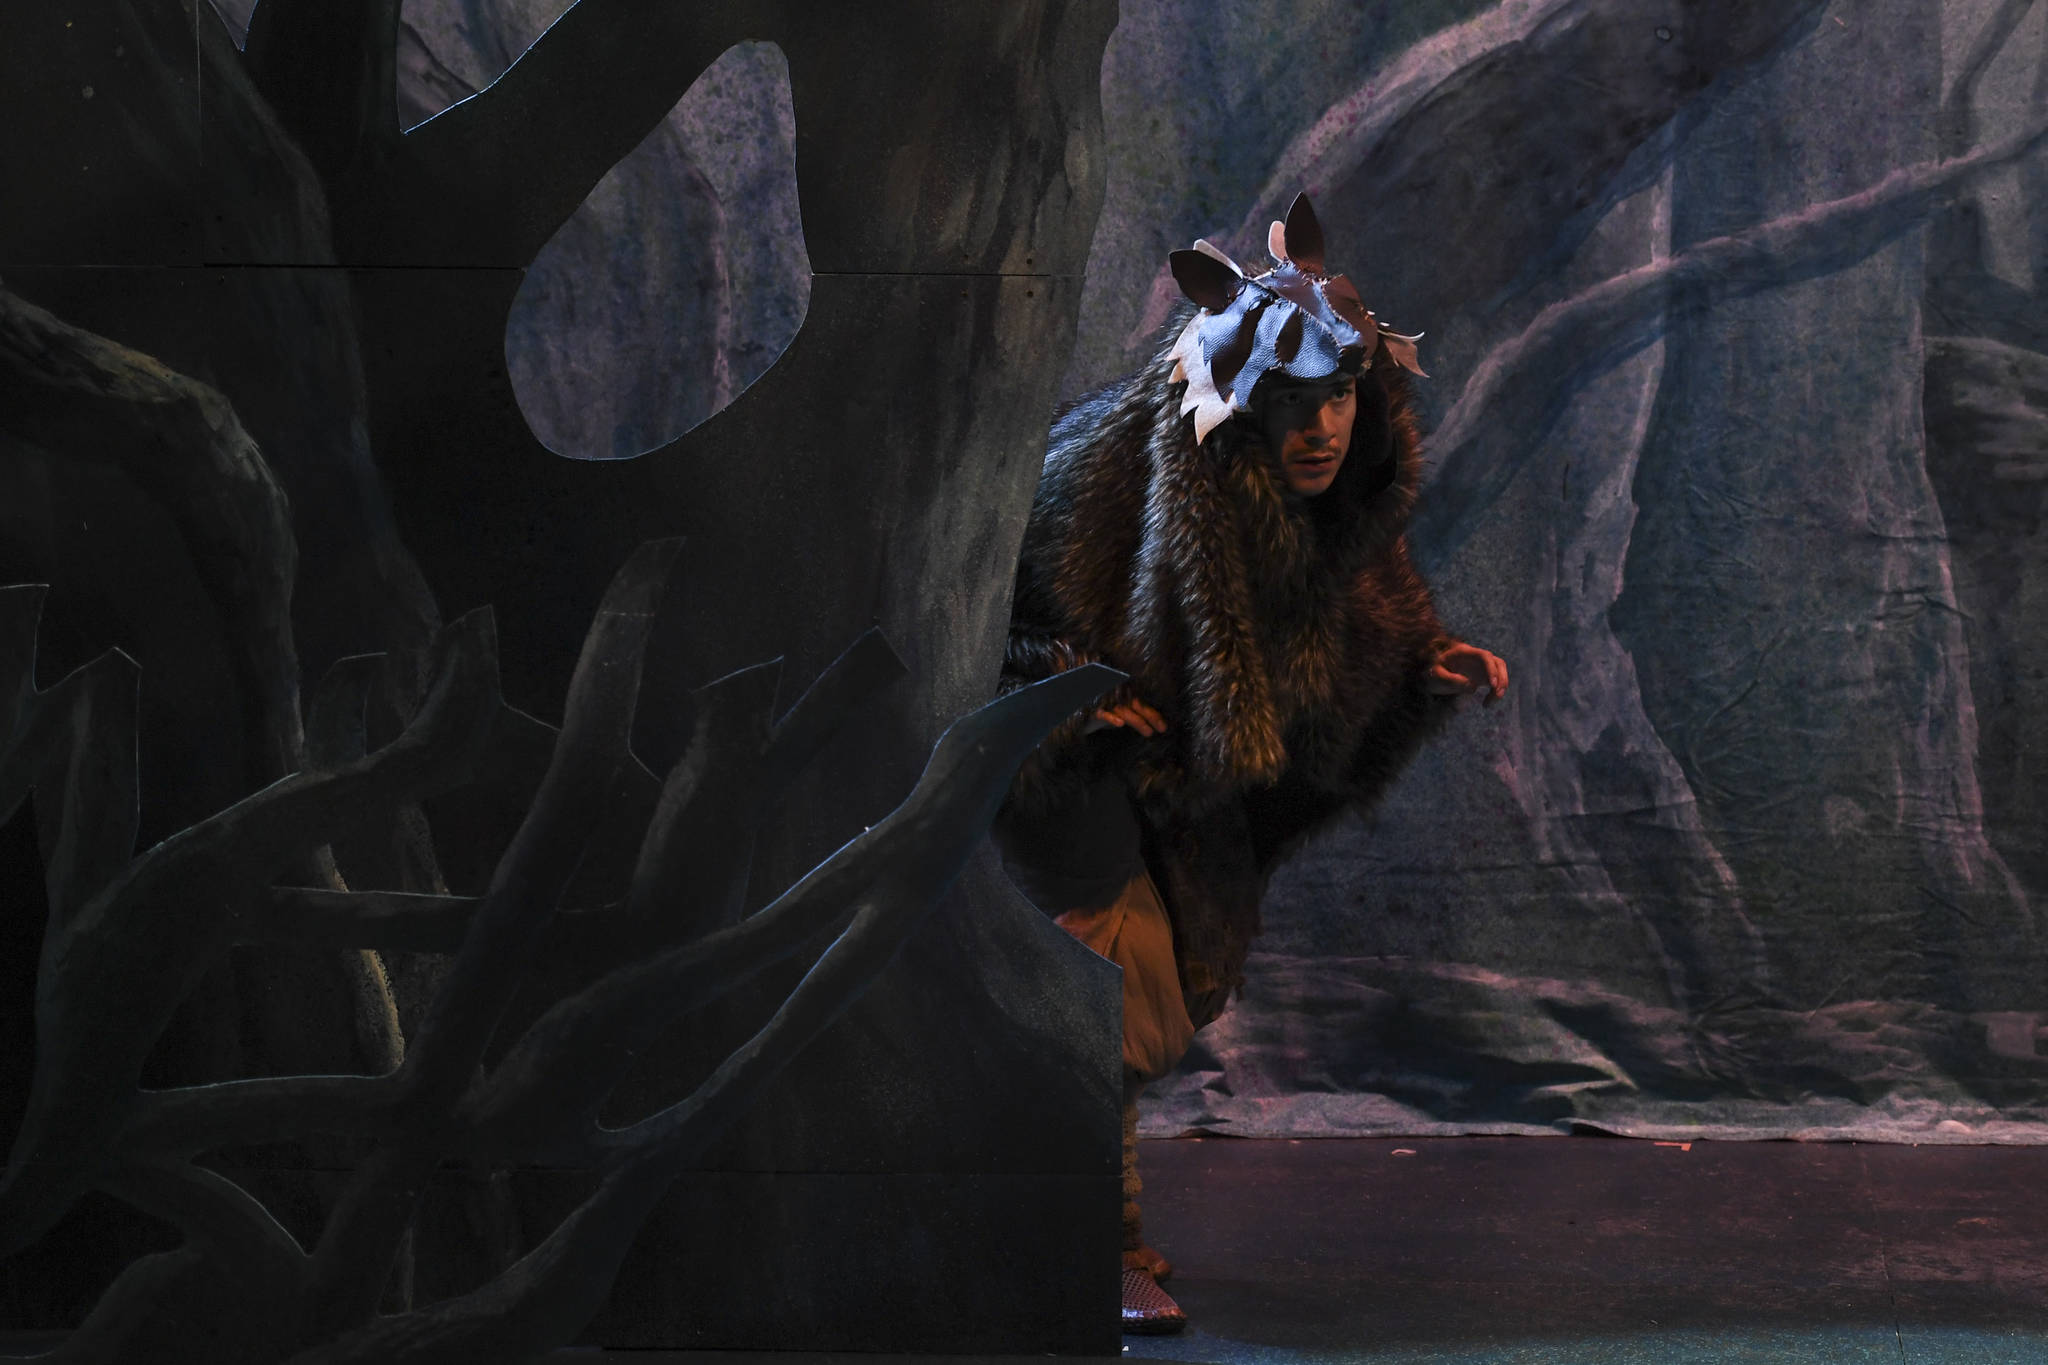 Rio Alberto, plays a magical wolf in Perseverance Theatre’s production of “Devilfish” written by Vera Starbard on Tuesday, Sept. 17, 2019. (Michael Penn | Juneau Empire)